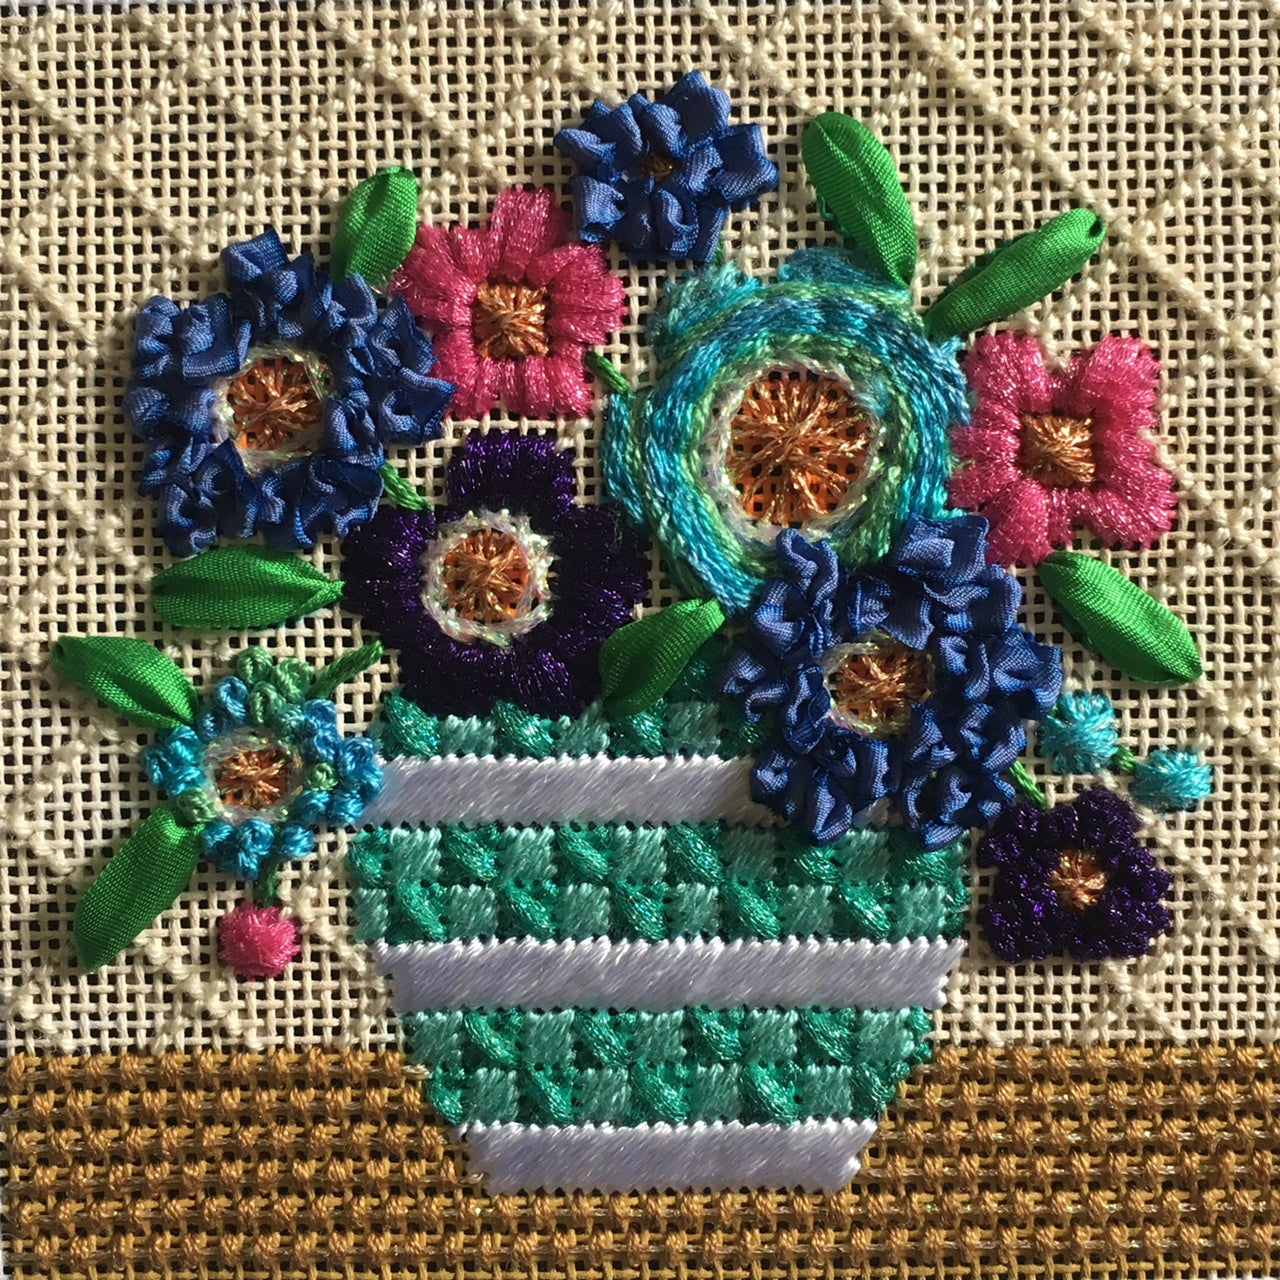 Stitched example of the Amanda Lawford blue mod flowers needlepoint canvas for a coaster with a turquoise and white vase